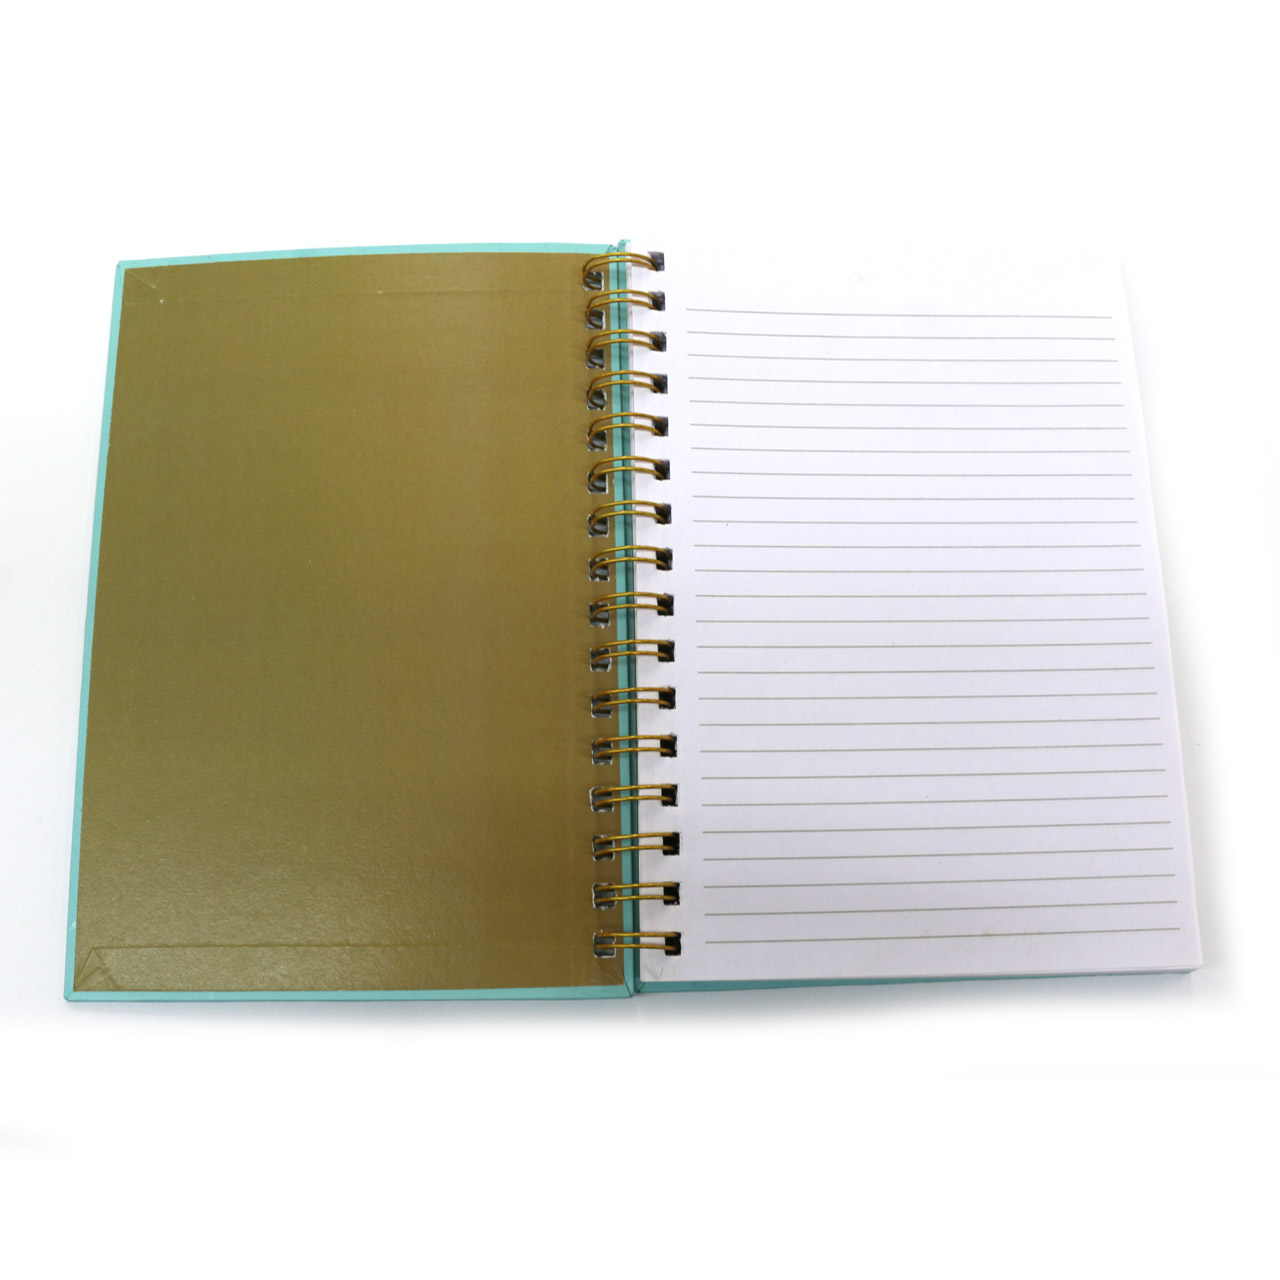 Hardcover Journal with Gold Accents, 100 Sheets